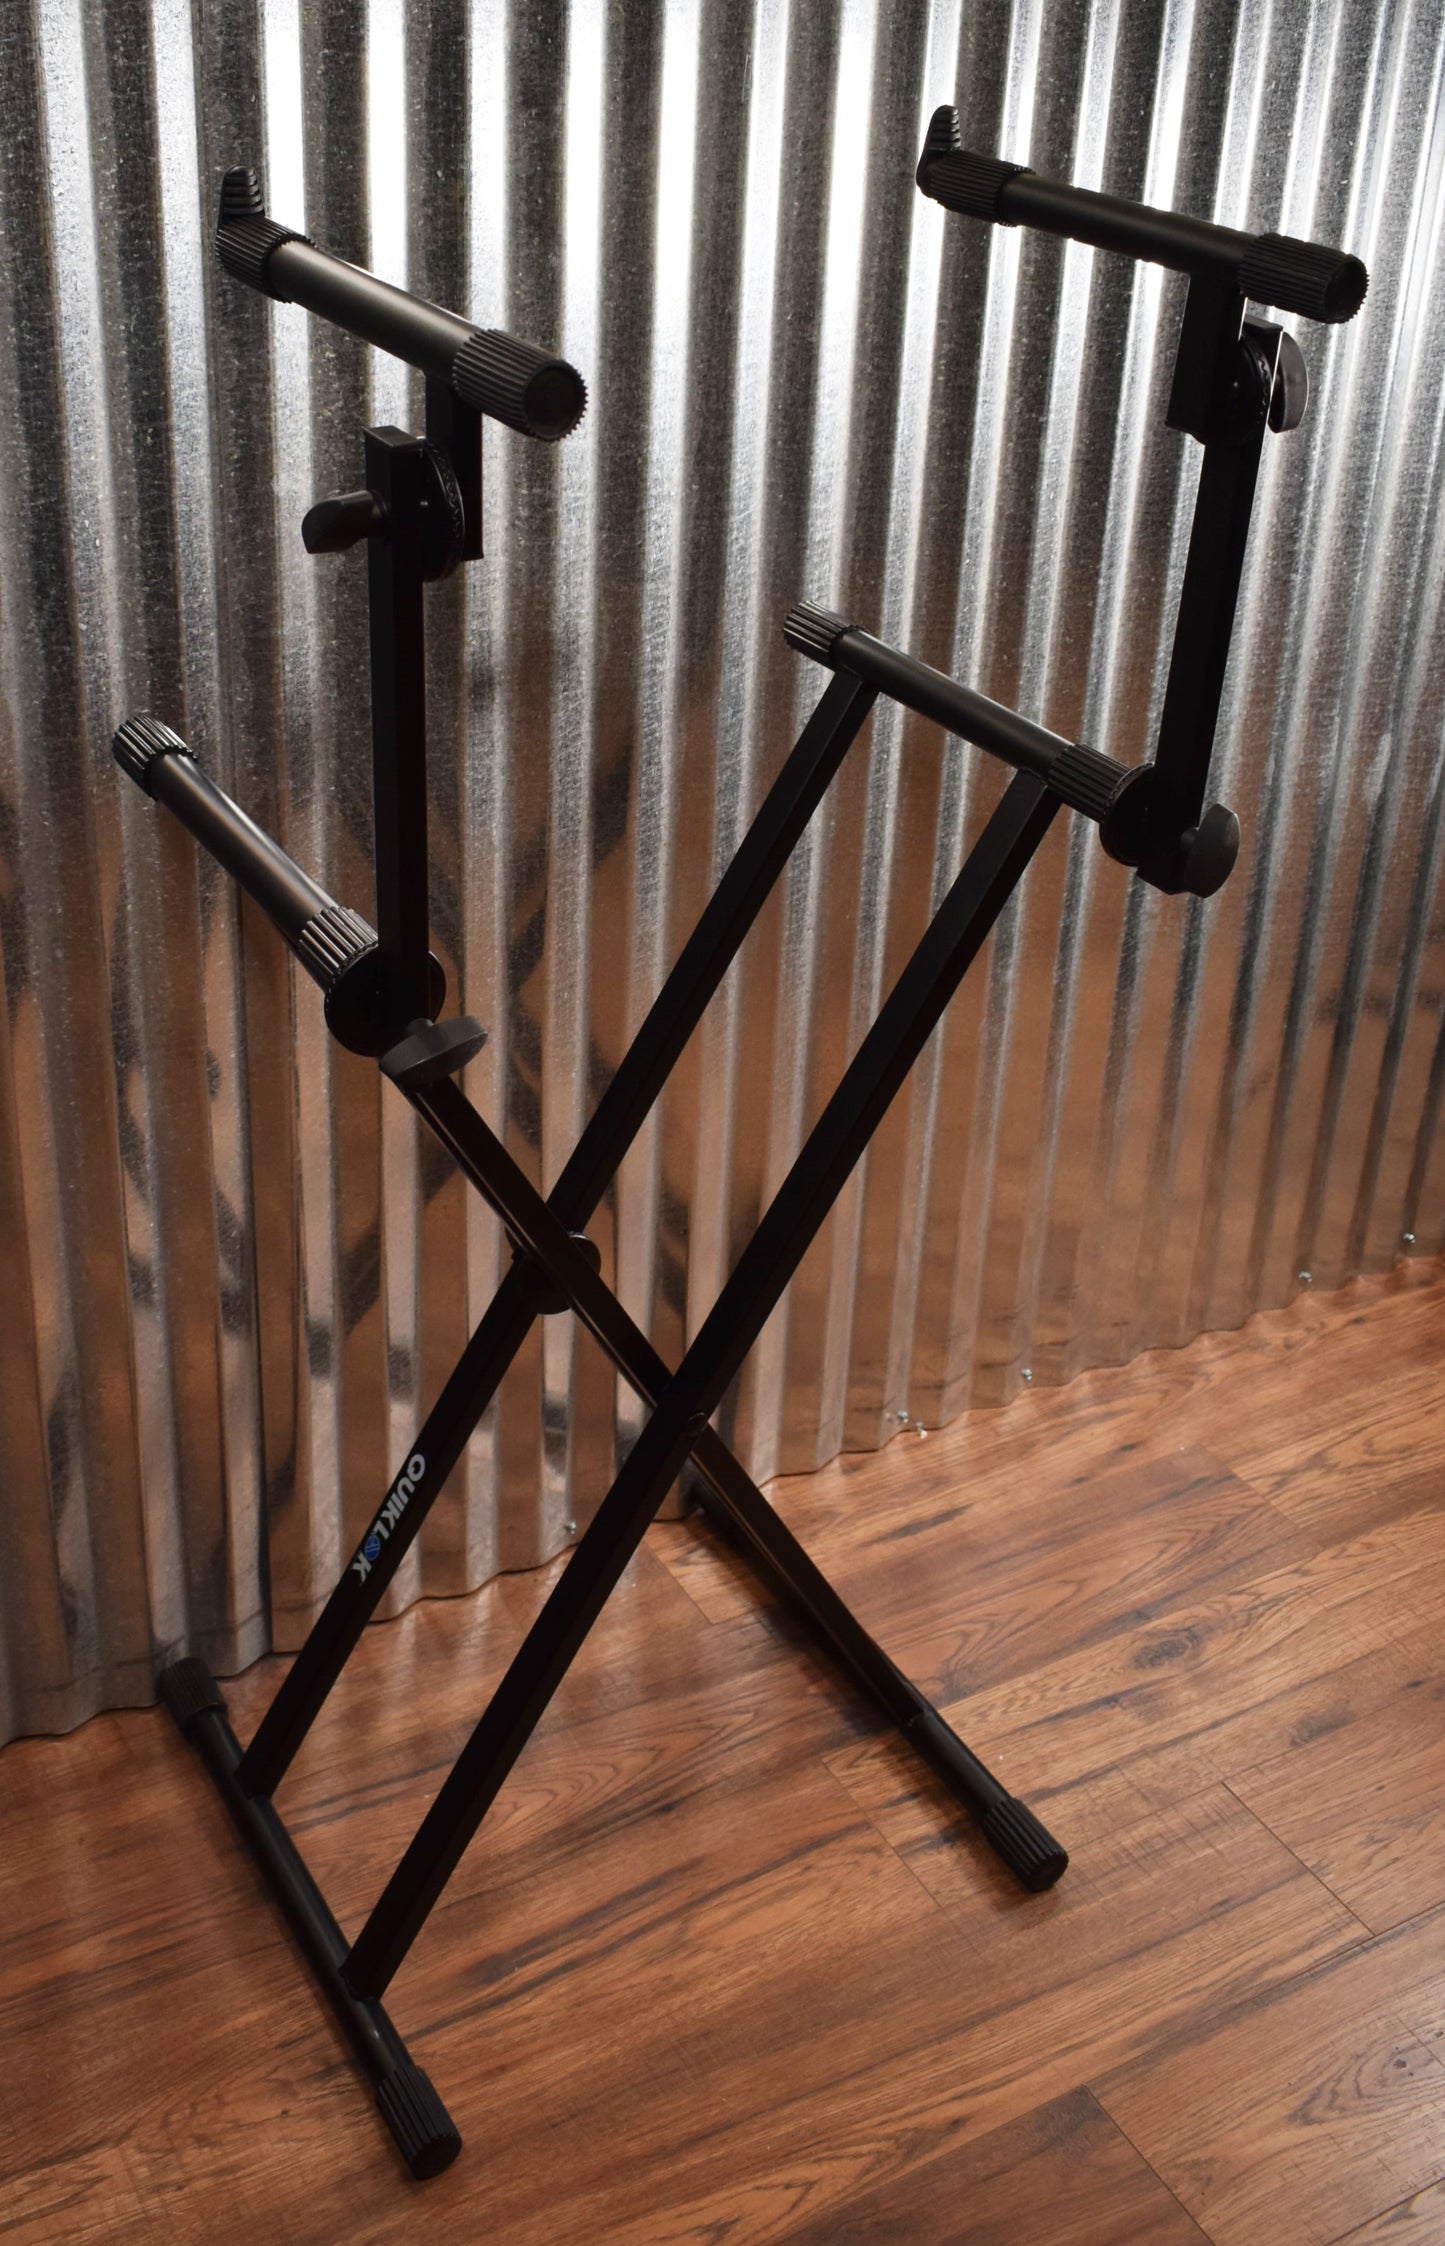 Quicklok T-22 Double Braced Two Tier Adjustable Keyboard Stand Used